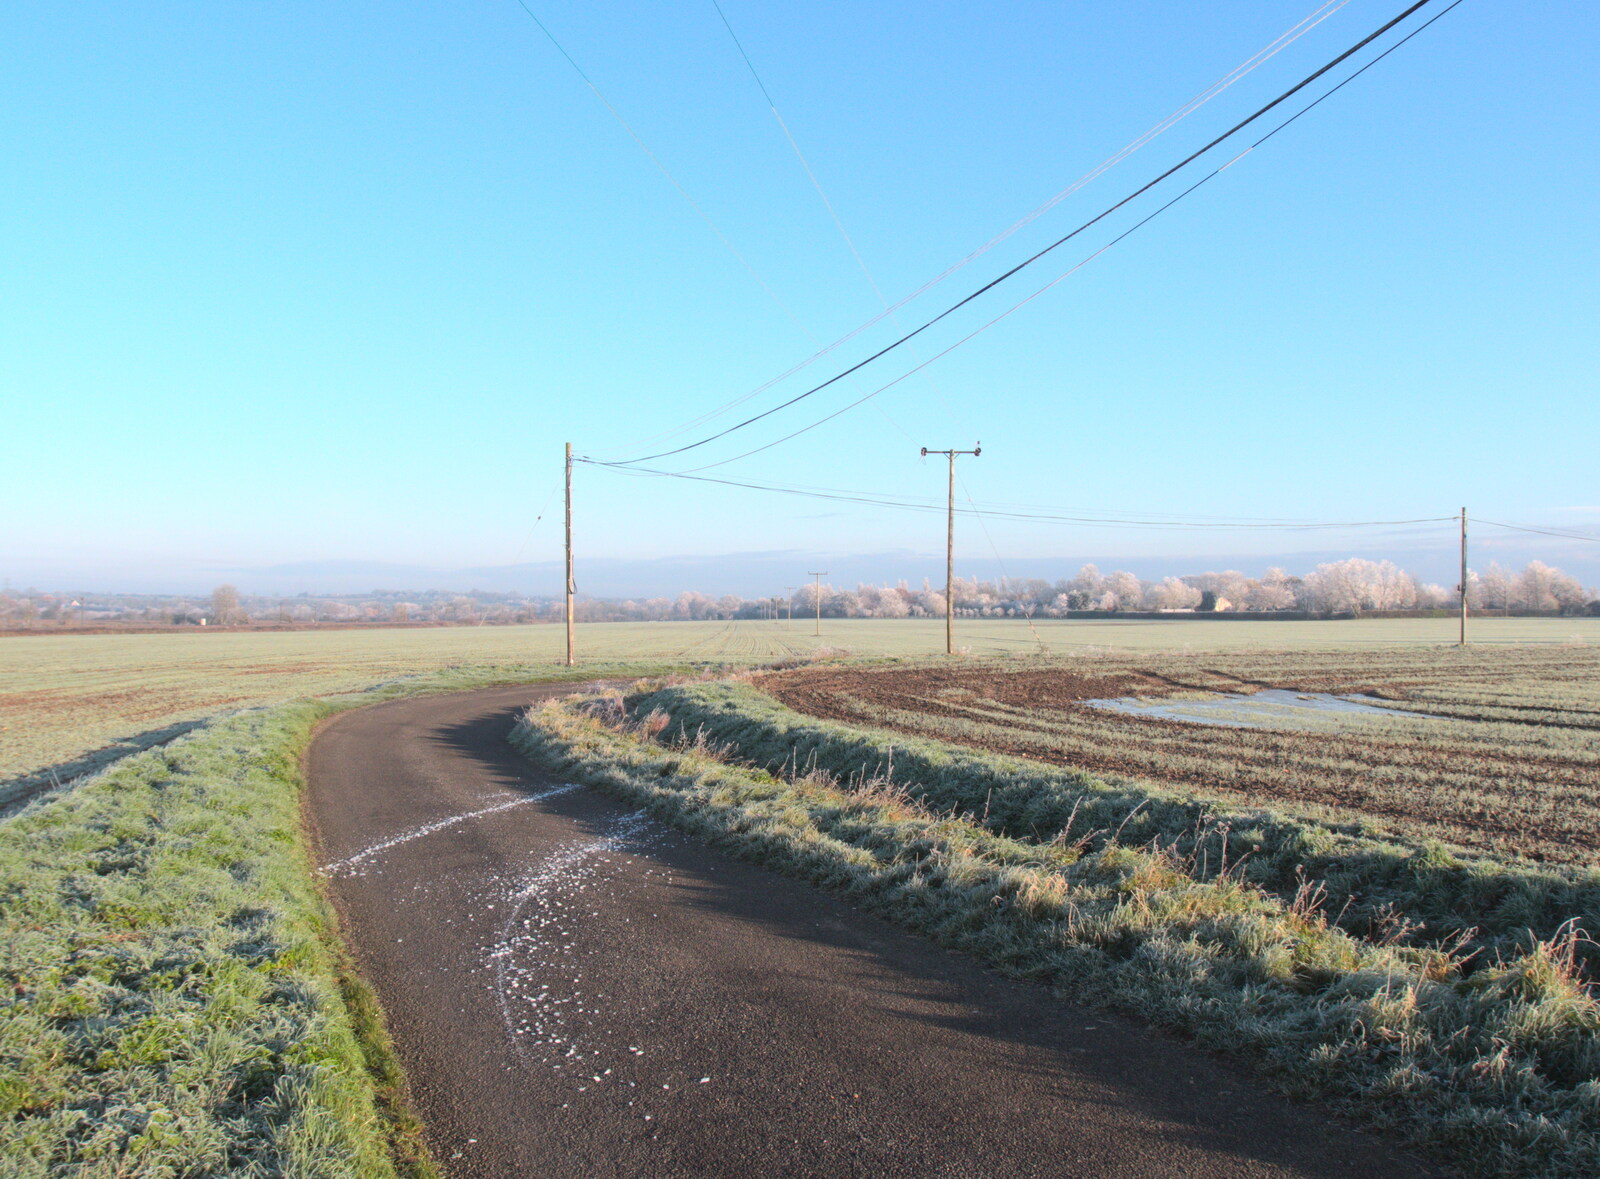 Ice from the wires has fallen off in lines from More Frosty Rides and the Old Mink Sheds, Brome, Suffolk - 10th December 2020